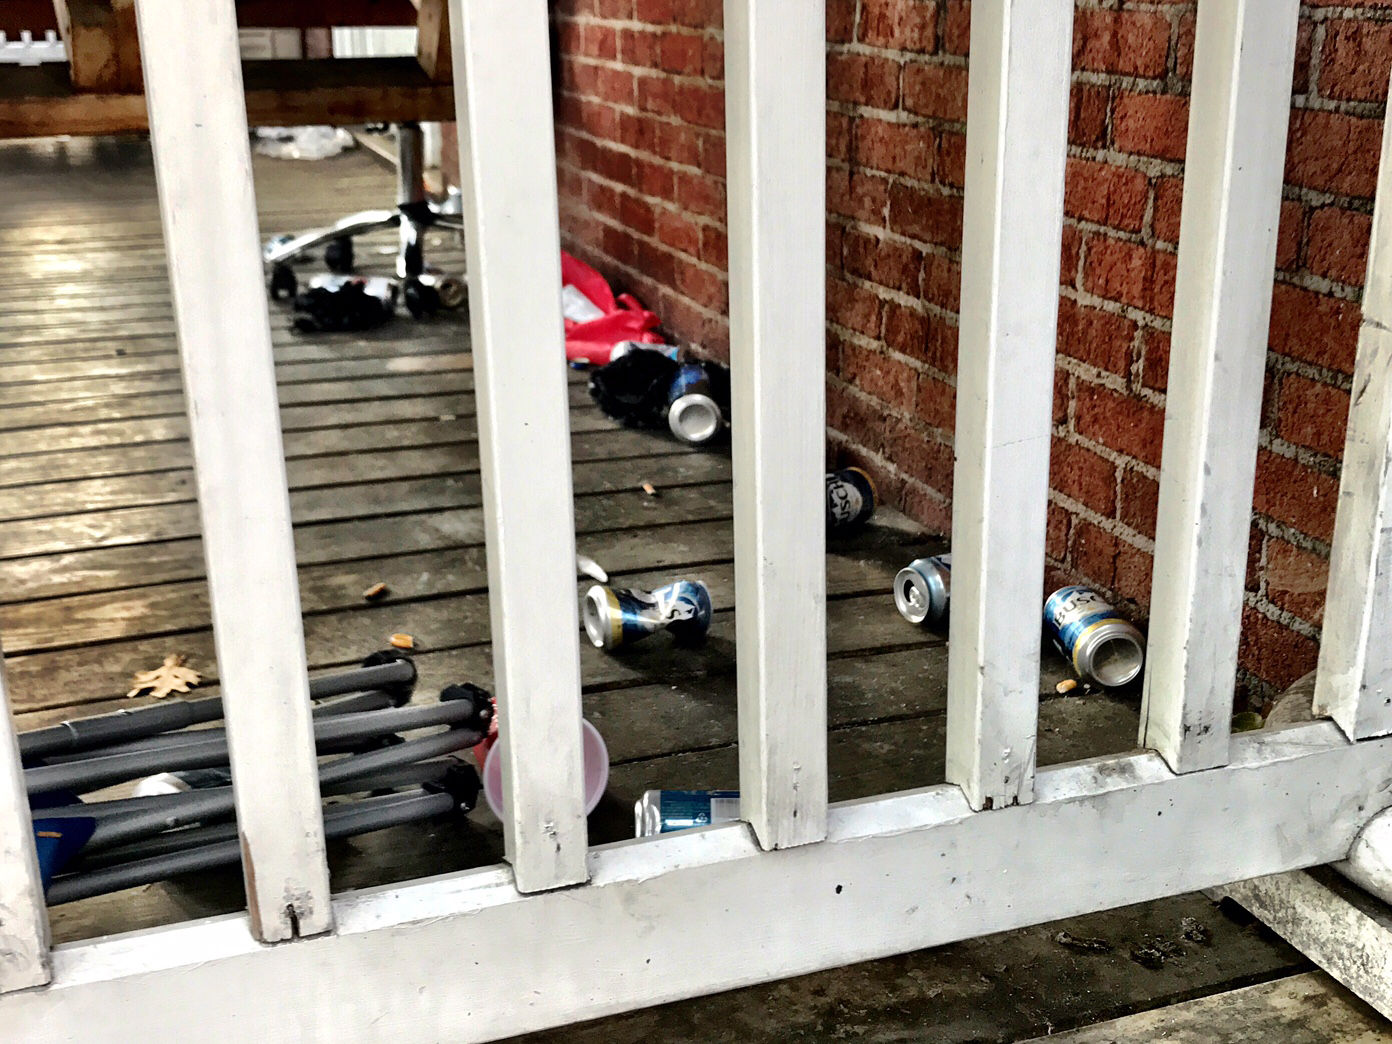 Beer cans on off-campus housing at the University of Virginia. University president Teresa Sullivan says the Wertland Street Block Party promotes unhealthy behavior through excessive drinking and puts an unneccesary strain on law enforcement. (WTOP/Neal Augenstein)